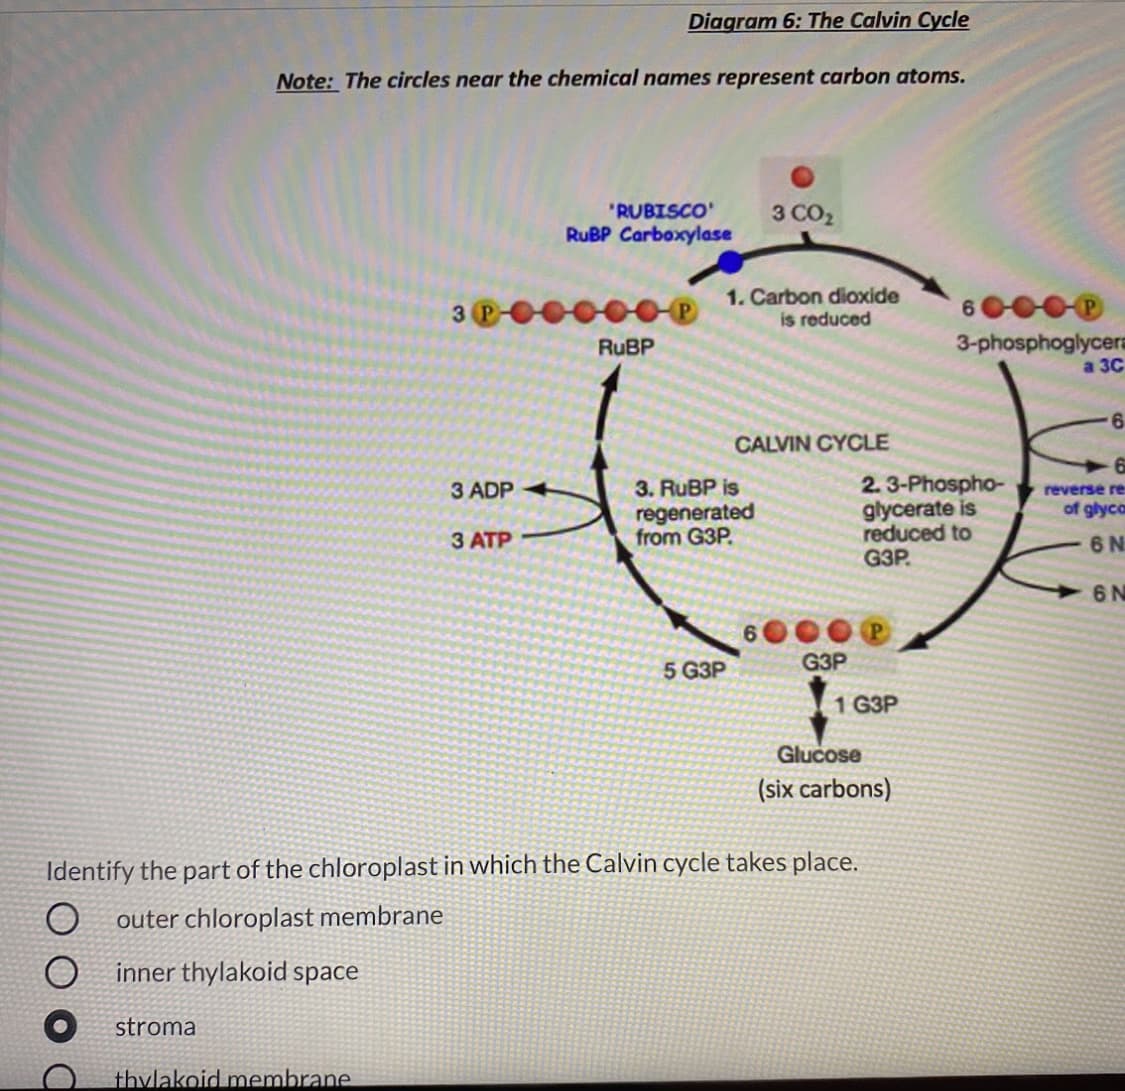 Diagram 6: The Calvin Cycle
Note: The circles near the chemical names represent carbon atoms.
"RUBISCO'
RUBP Carboxylase
3 CO2
1. Carbon dioxide
is reduced
60000
3
3-phosphoglycera
a 3C
RUBP
6.
CALVIN CYCLE
3. RUBP is
regenerated
from G3P.
2.3-Phospho-
glycerate is
reduced to
G3P
3 ADP
reverse re
of glyca
3 ATP
6 N
6 N
5 G3P
G3P
1 G3P
Glucose
(six carbons)
Identify the part of the chloroplast in which the Calvin cycle takes place.
outer chloroplast membrane
inner thylakoid space
stroma
thylakoid membrane.
